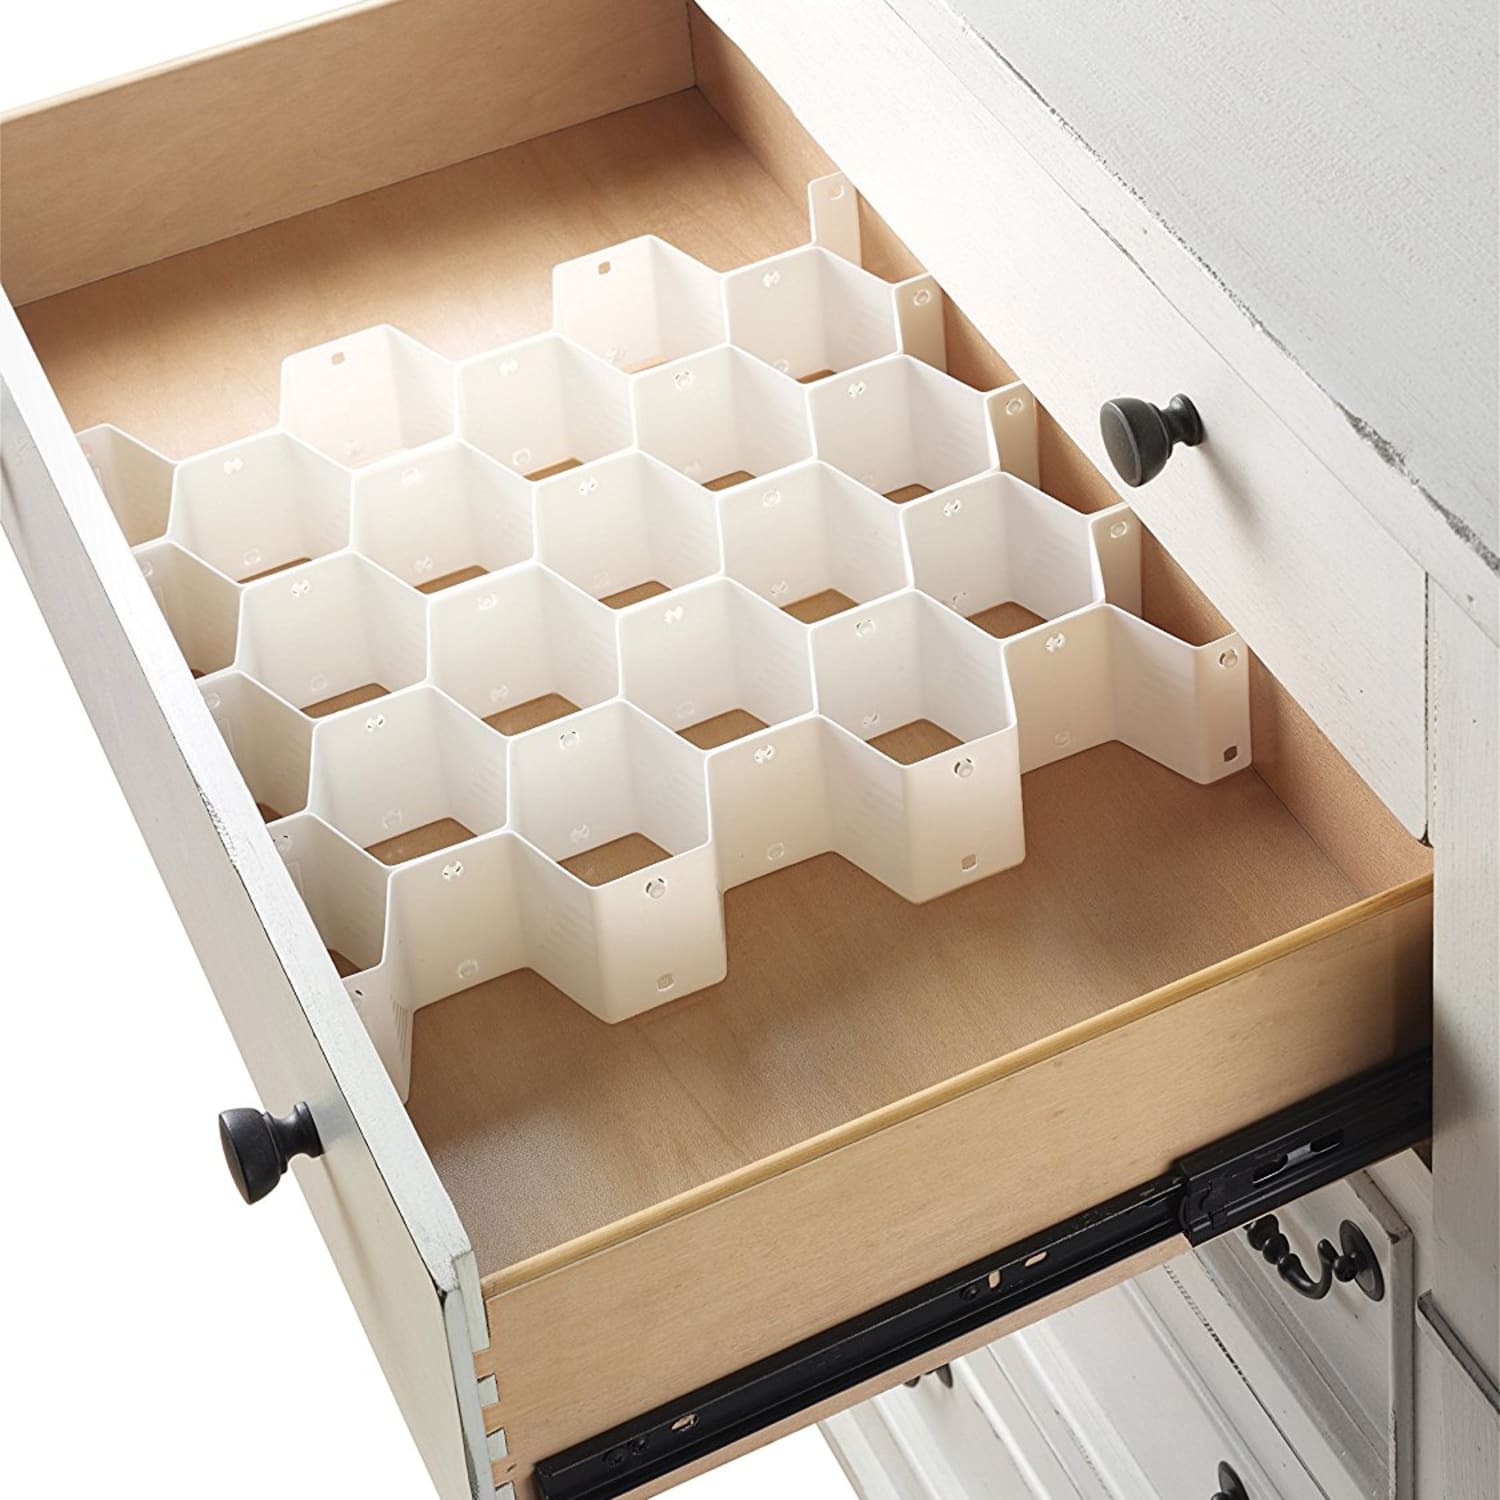 Undergarment Drawer Organizer Available at